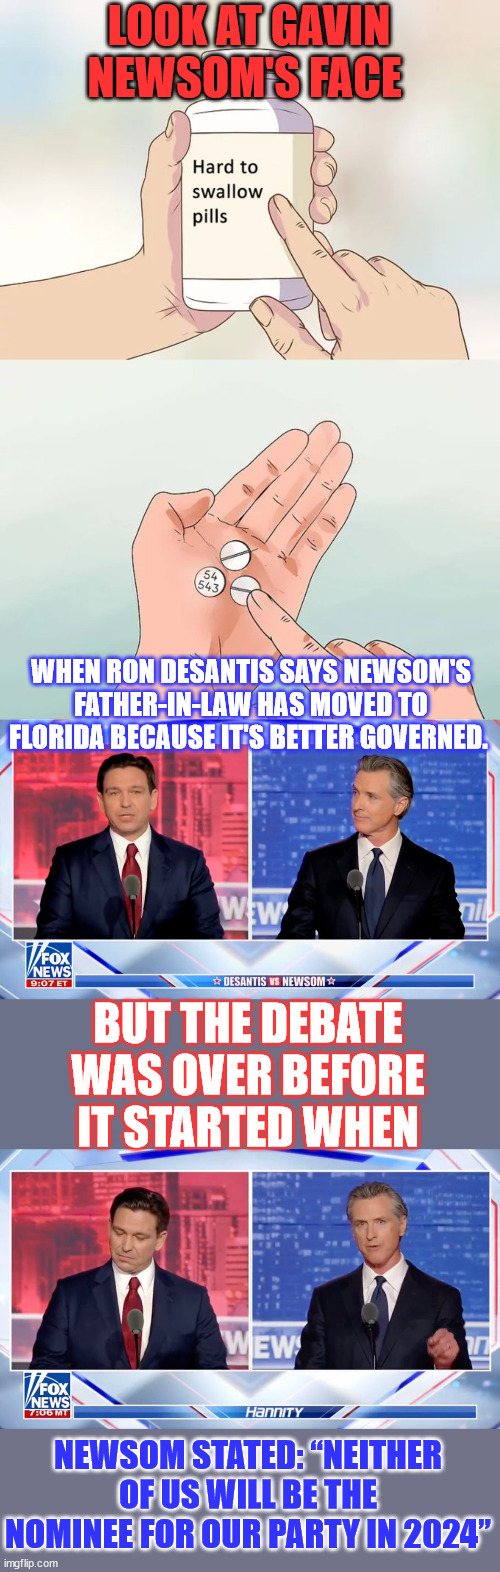 Another meaningless media display for the Trump haters... | LOOK AT GAVIN NEWSOM'S FACE; WHEN RON DESANTIS SAYS NEWSOM'S FATHER-IN-LAW HAS MOVED TO FLORIDA BECAUSE IT'S BETTER GOVERNED. BUT THE DEBATE WAS OVER BEFORE IT STARTED WHEN; NEWSOM STATED: “NEITHER OF US WILL BE THE NOMINEE FOR OUR PARTY IN 2024” | image tagged in memes,hard to swallow pills,gavin,ron,debate | made w/ Imgflip meme maker